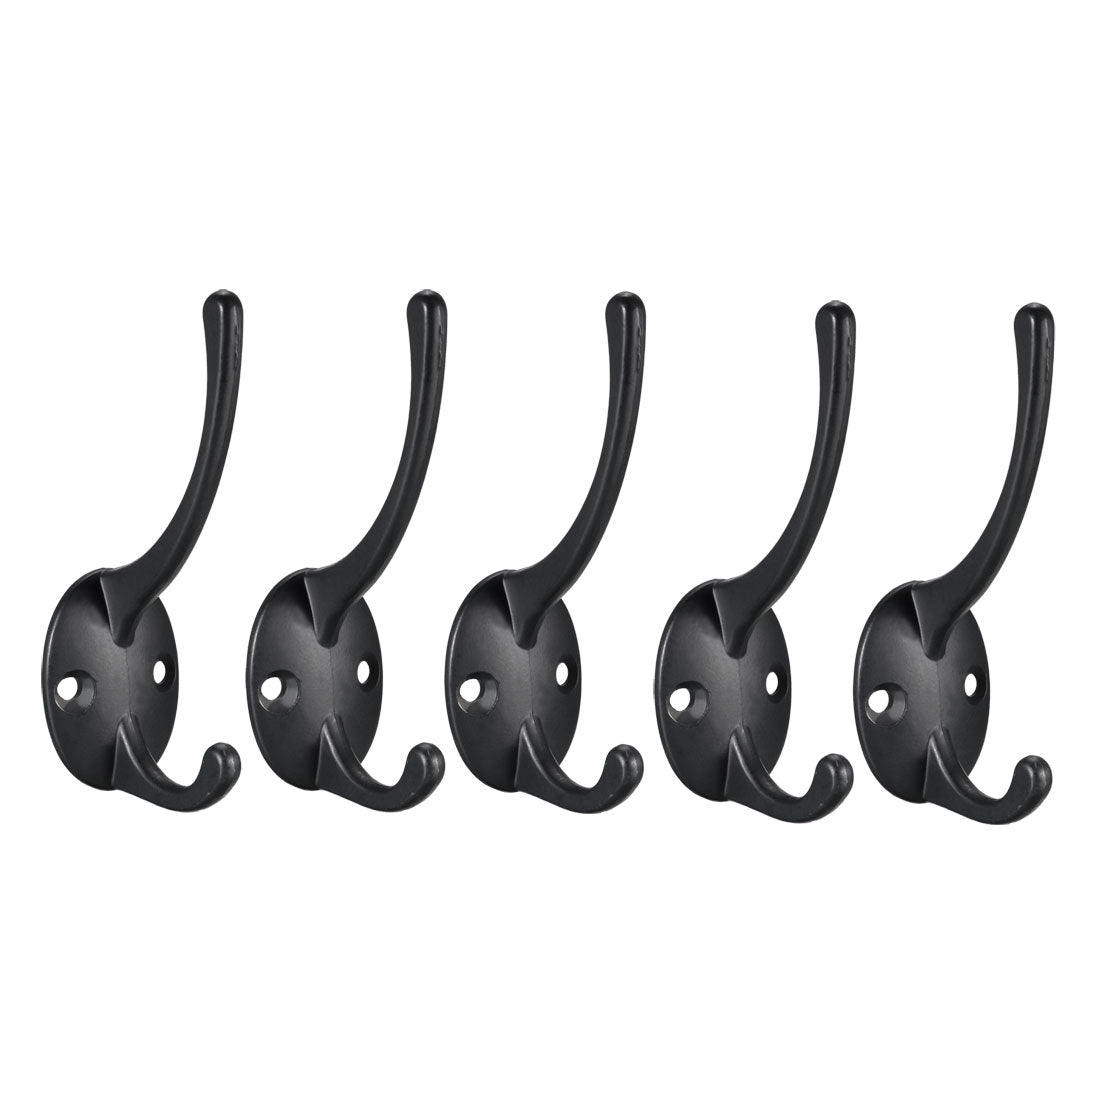 uxcell Uxcell Dual Prong Coat Hooks Wall Mounted Retro Double Hooks Utility Black Hook for Coat Scarf Bag Towel Key Cap Cup Hat 87mm x 29mm x 42mm 5pcs